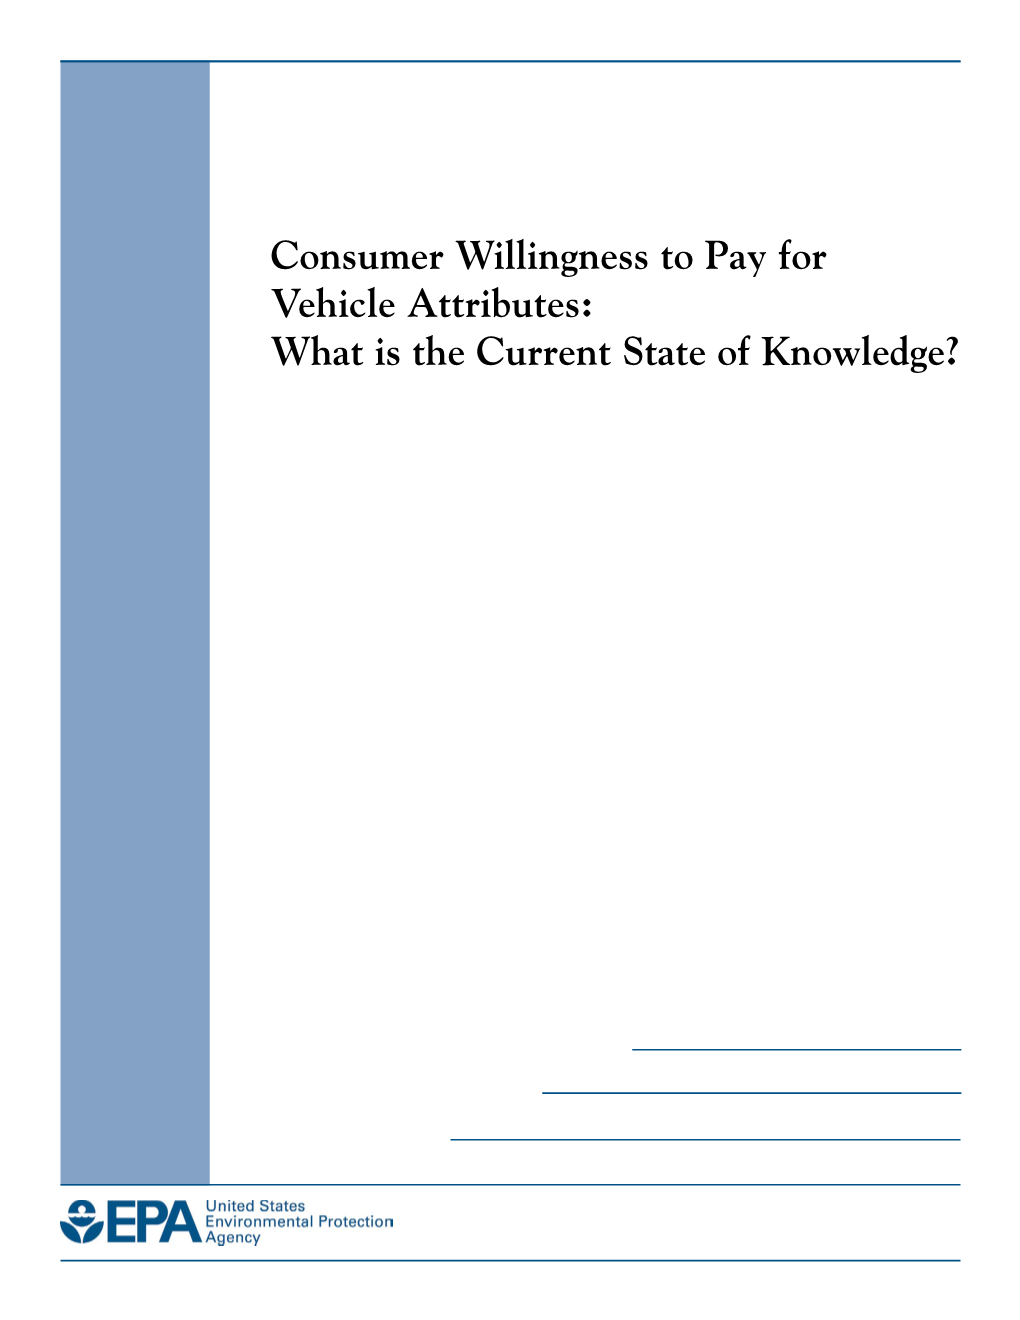 Consumer Willingness to Pay for Vehicle Attributes: What Is the Current State of Knowledge?